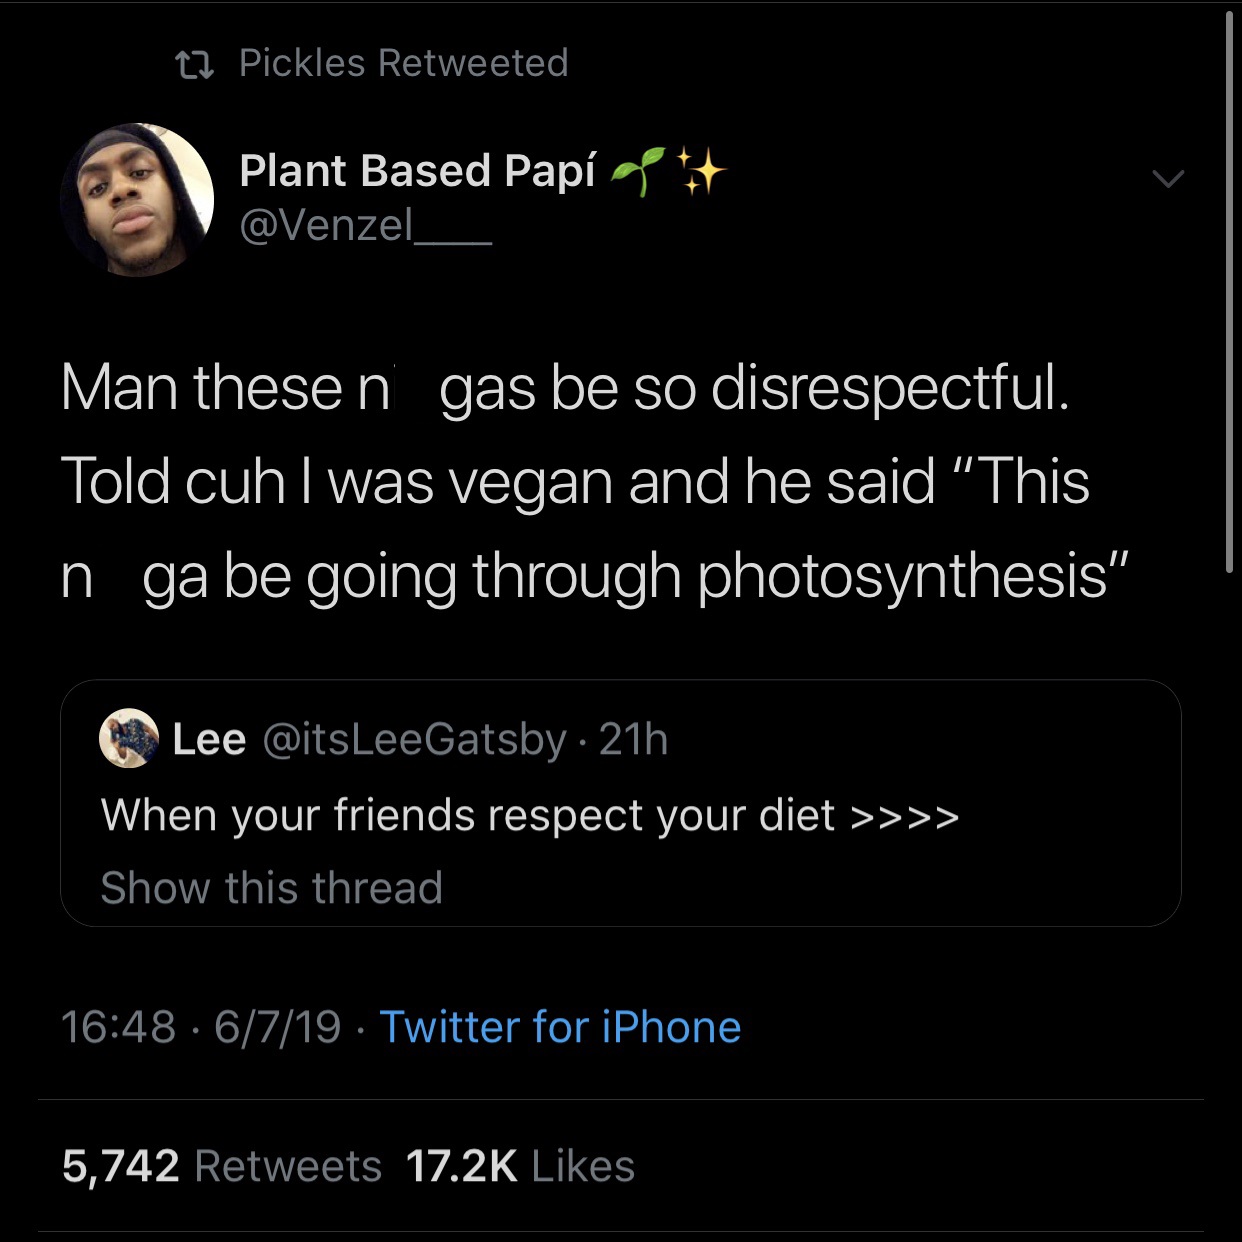 screenshot - 22 Pickles Retweeted Plant Based Pap g Man these n gas be so disrespectful. Told cuh I was vegan and he said "This in ga be going through photosynthesis" Lee 21h When your friends respect your diet >>>> Show this thread 6719. Twitter for iPho